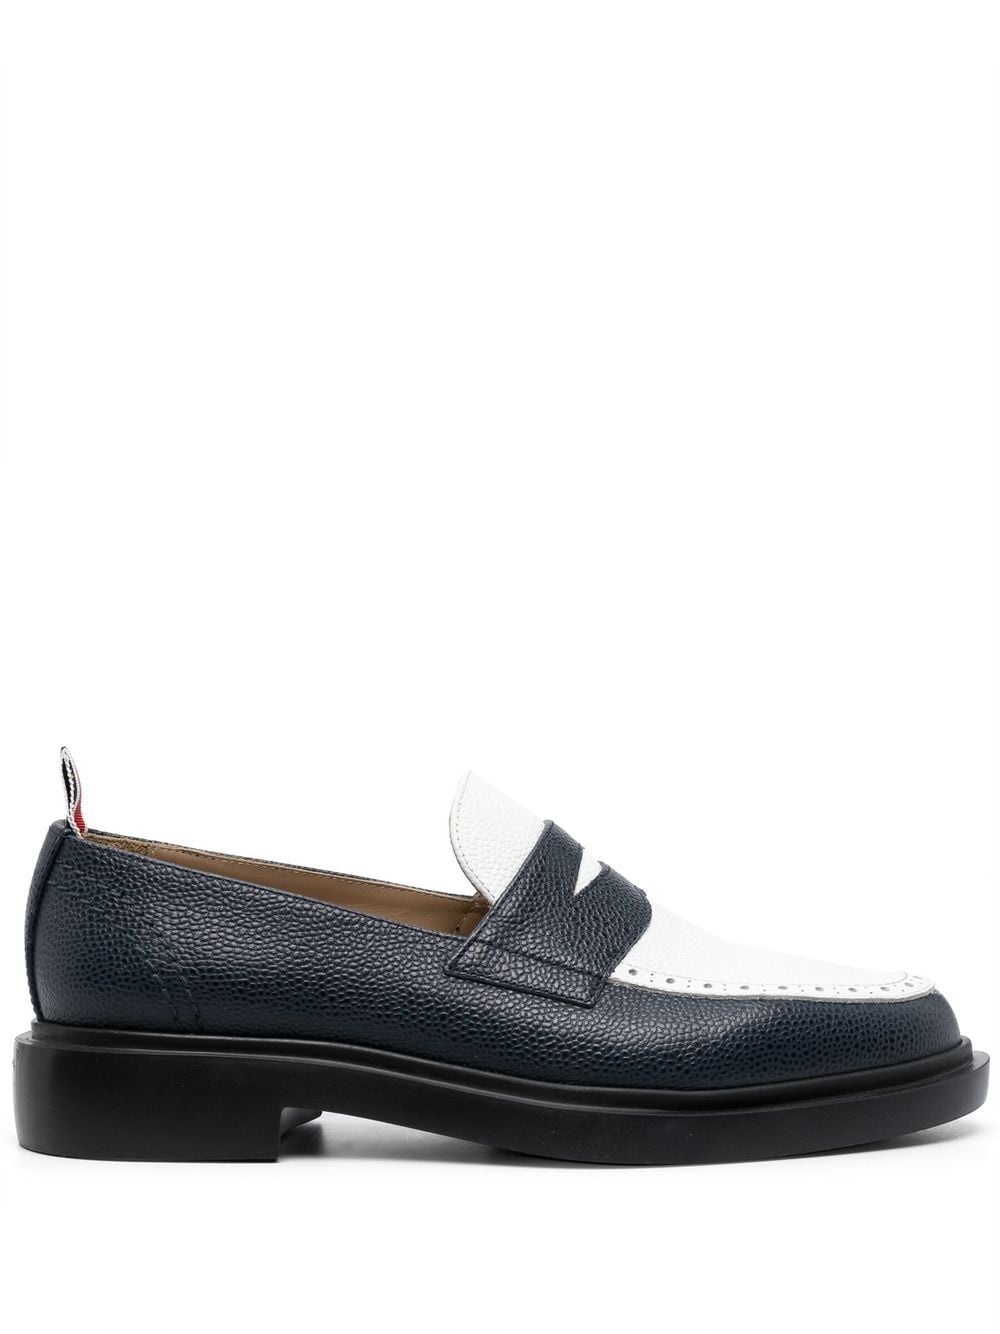 classic lightweight penny loafers - 1